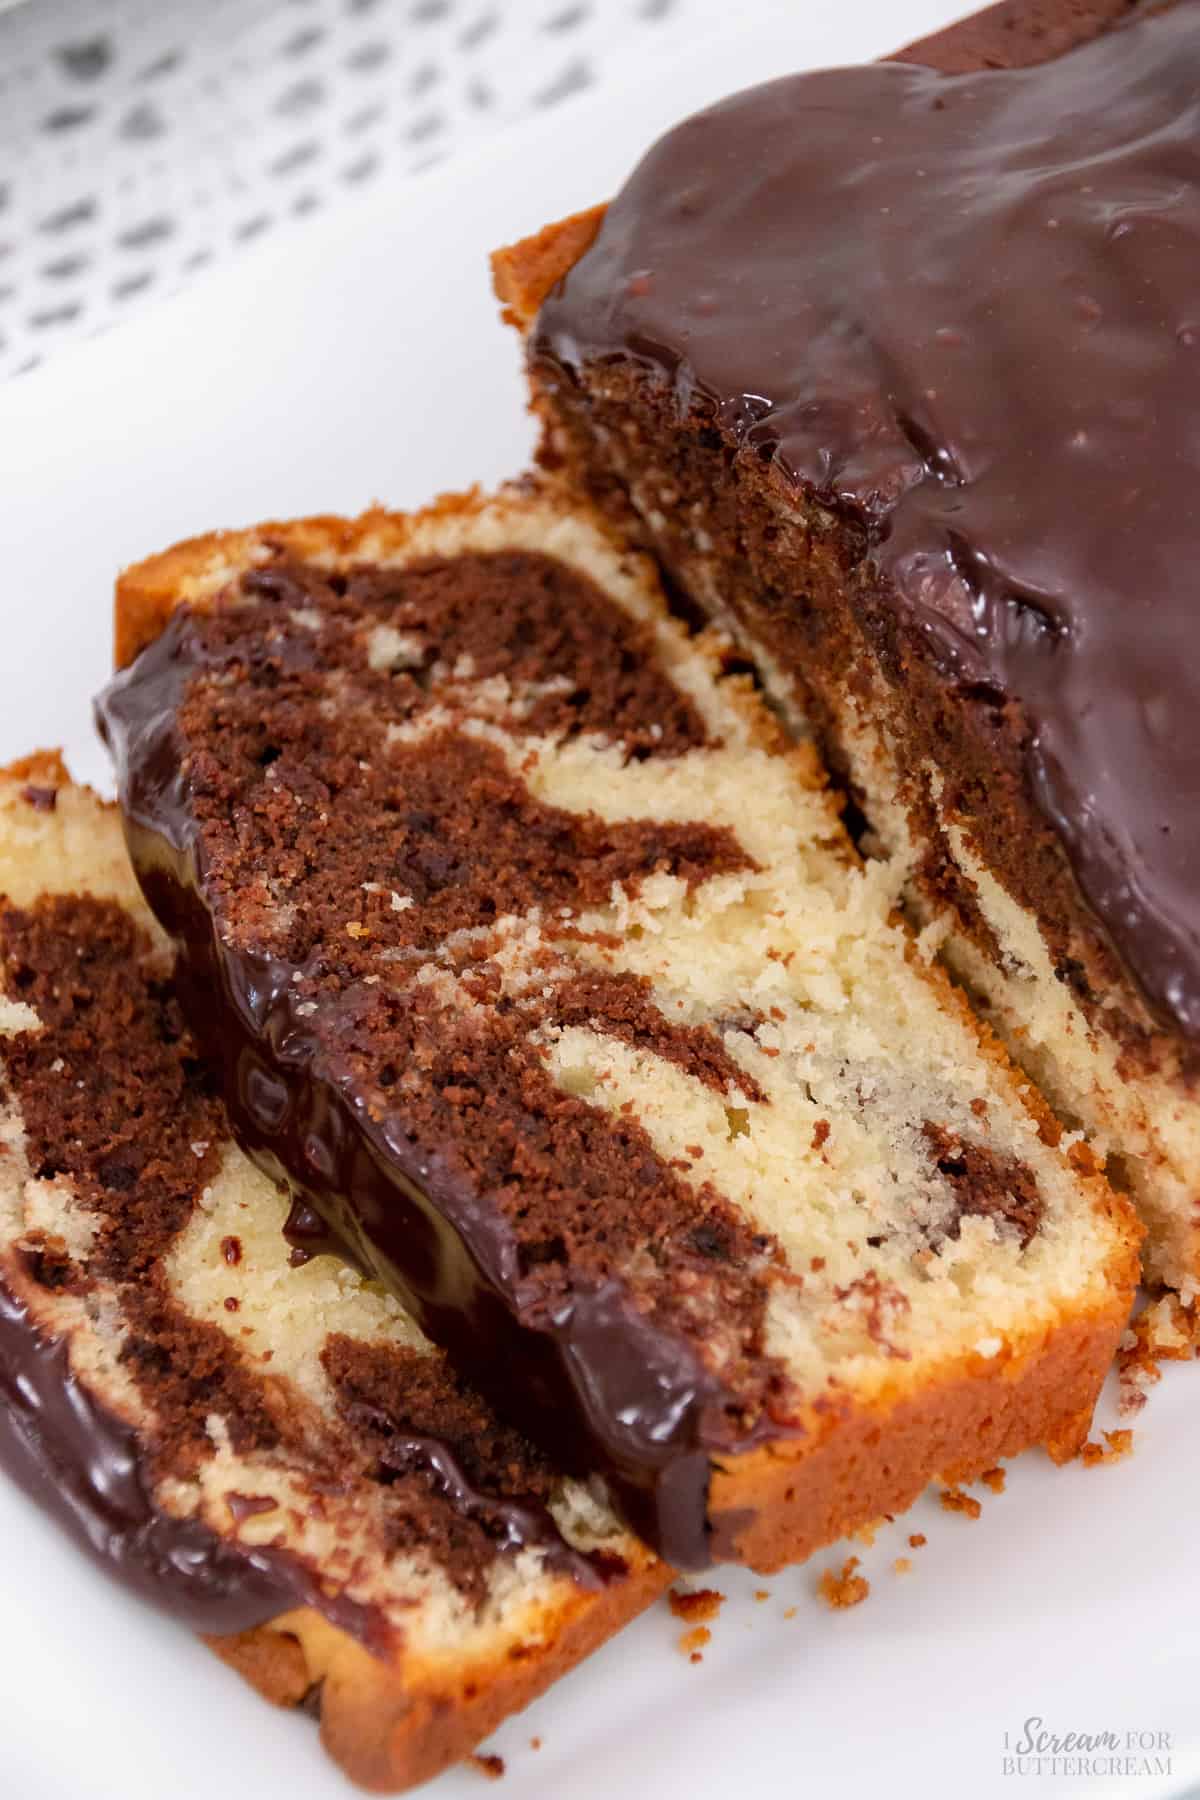 Top down view of marble snack cake sliced on a white platter.